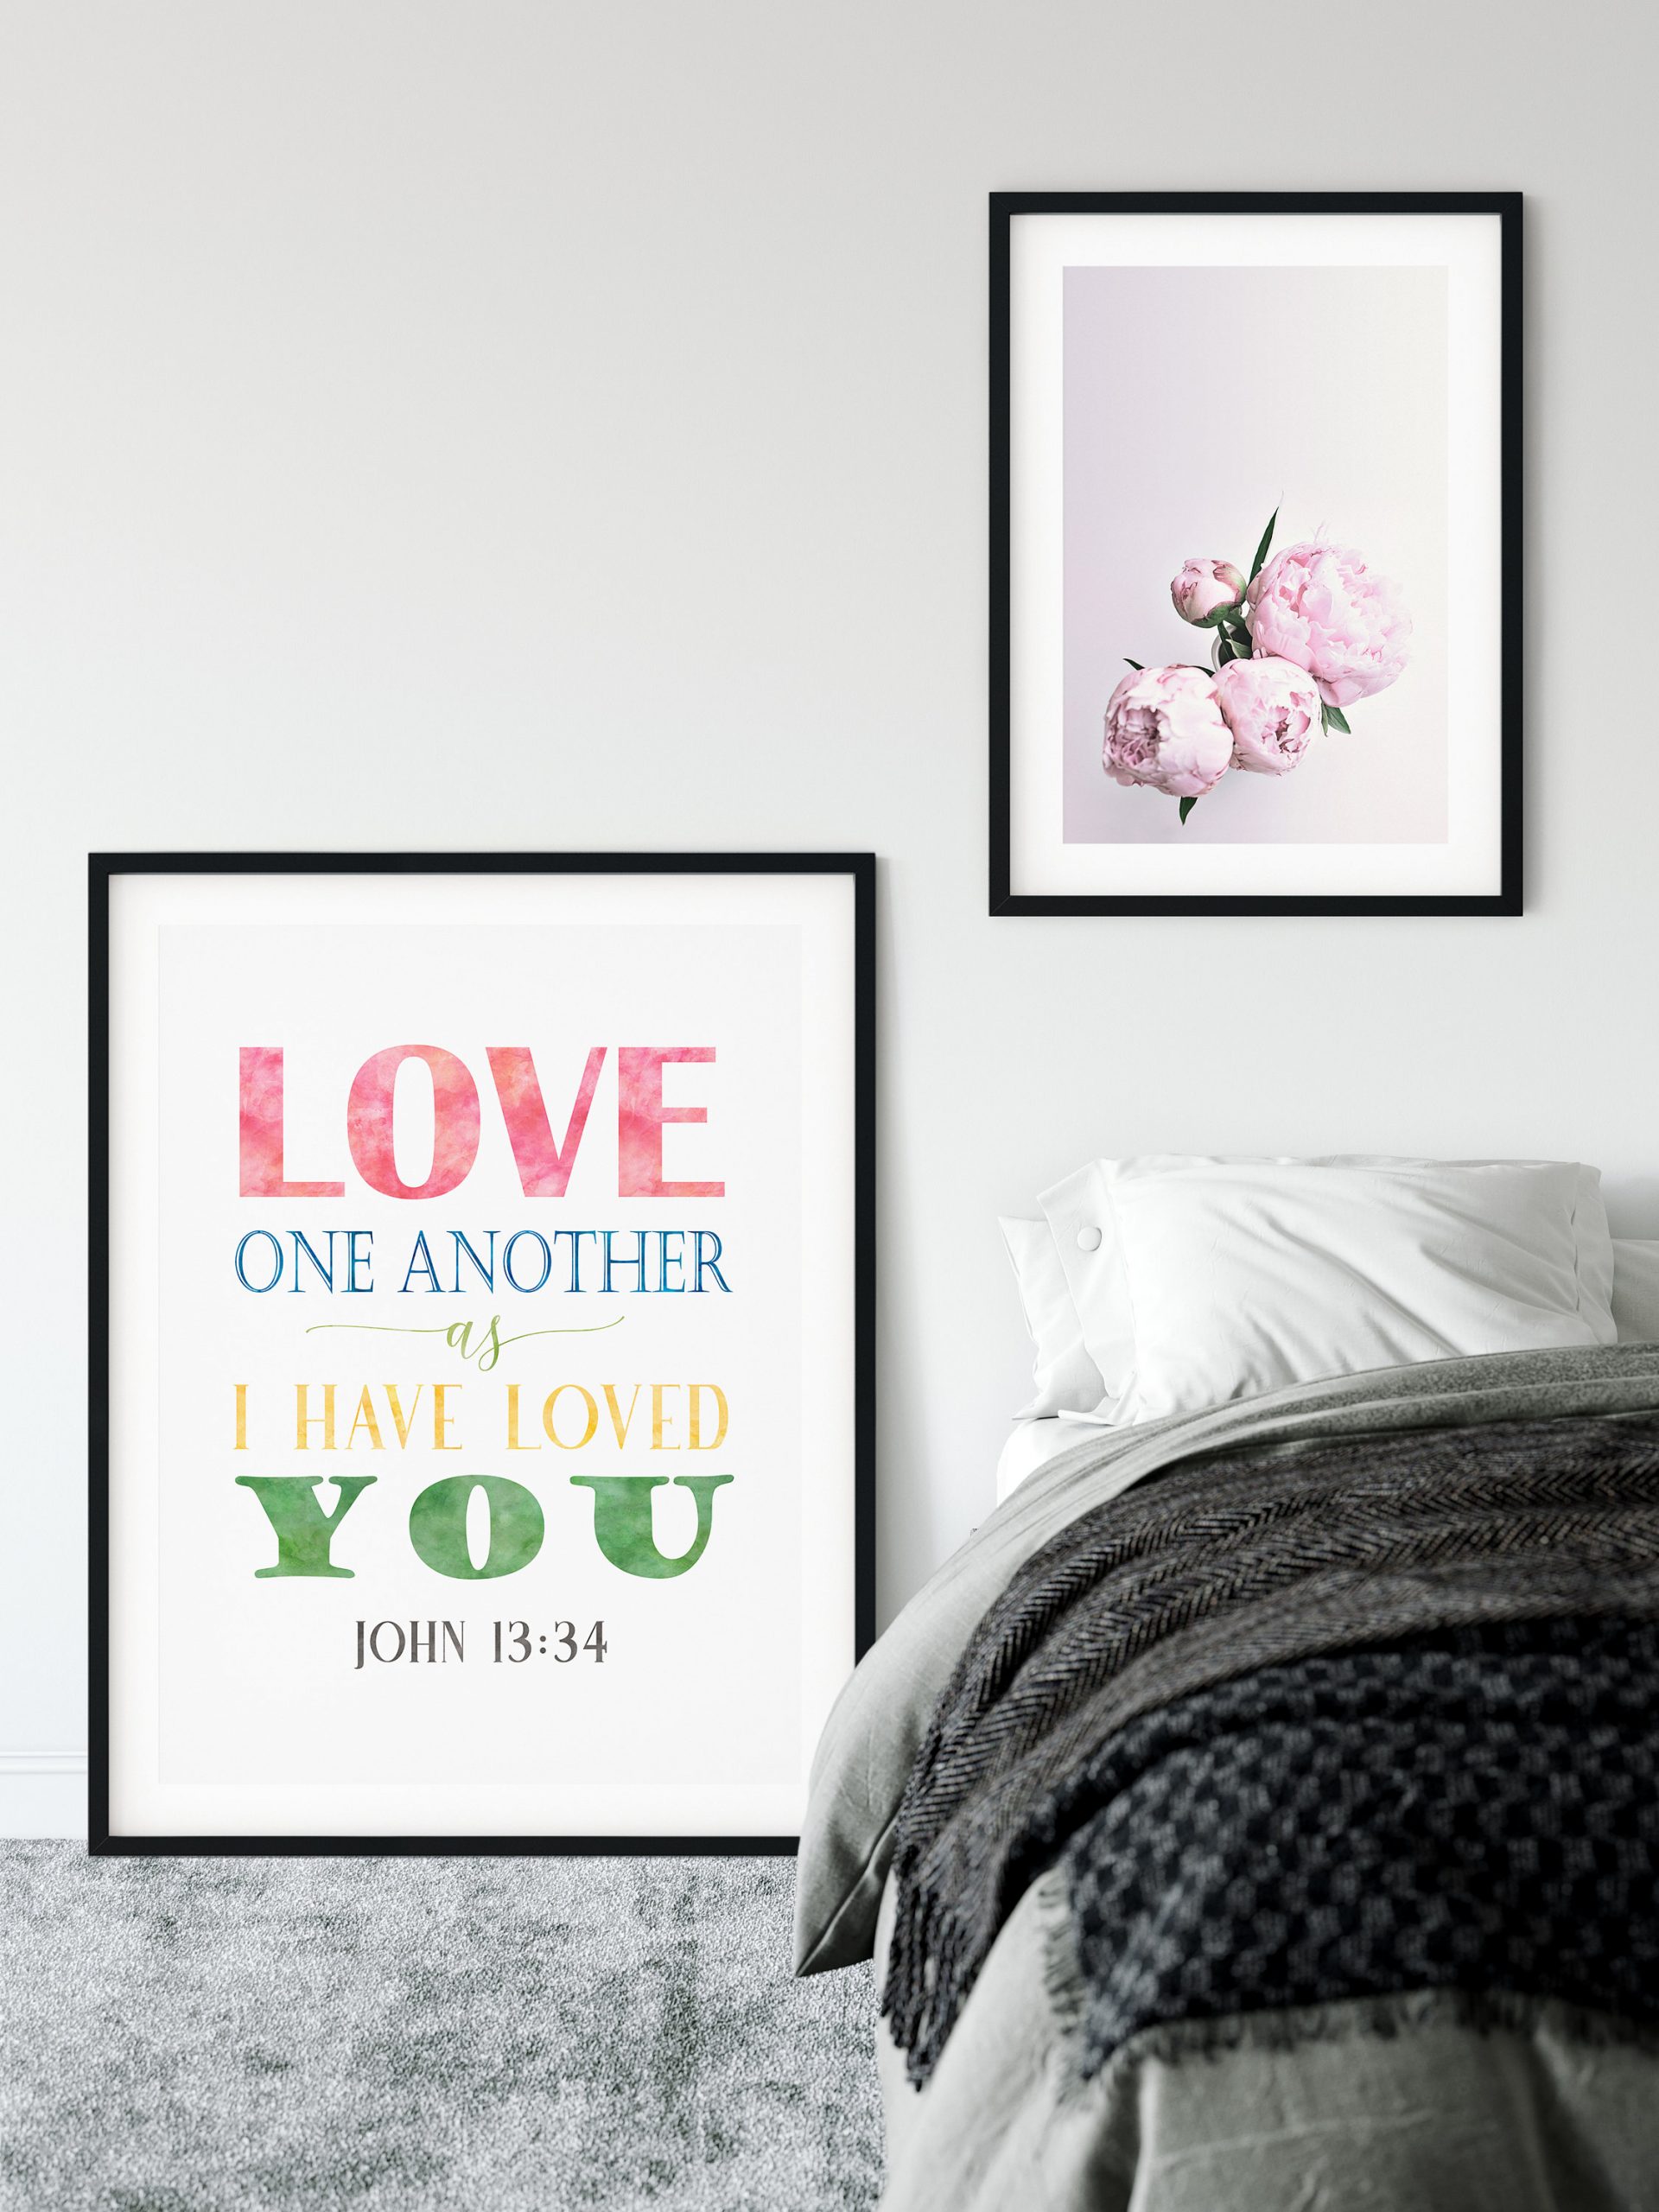 Love One Another As I Have Loved You, John 13:34, Printable Scripture Wall Art, Bible Verse Prints